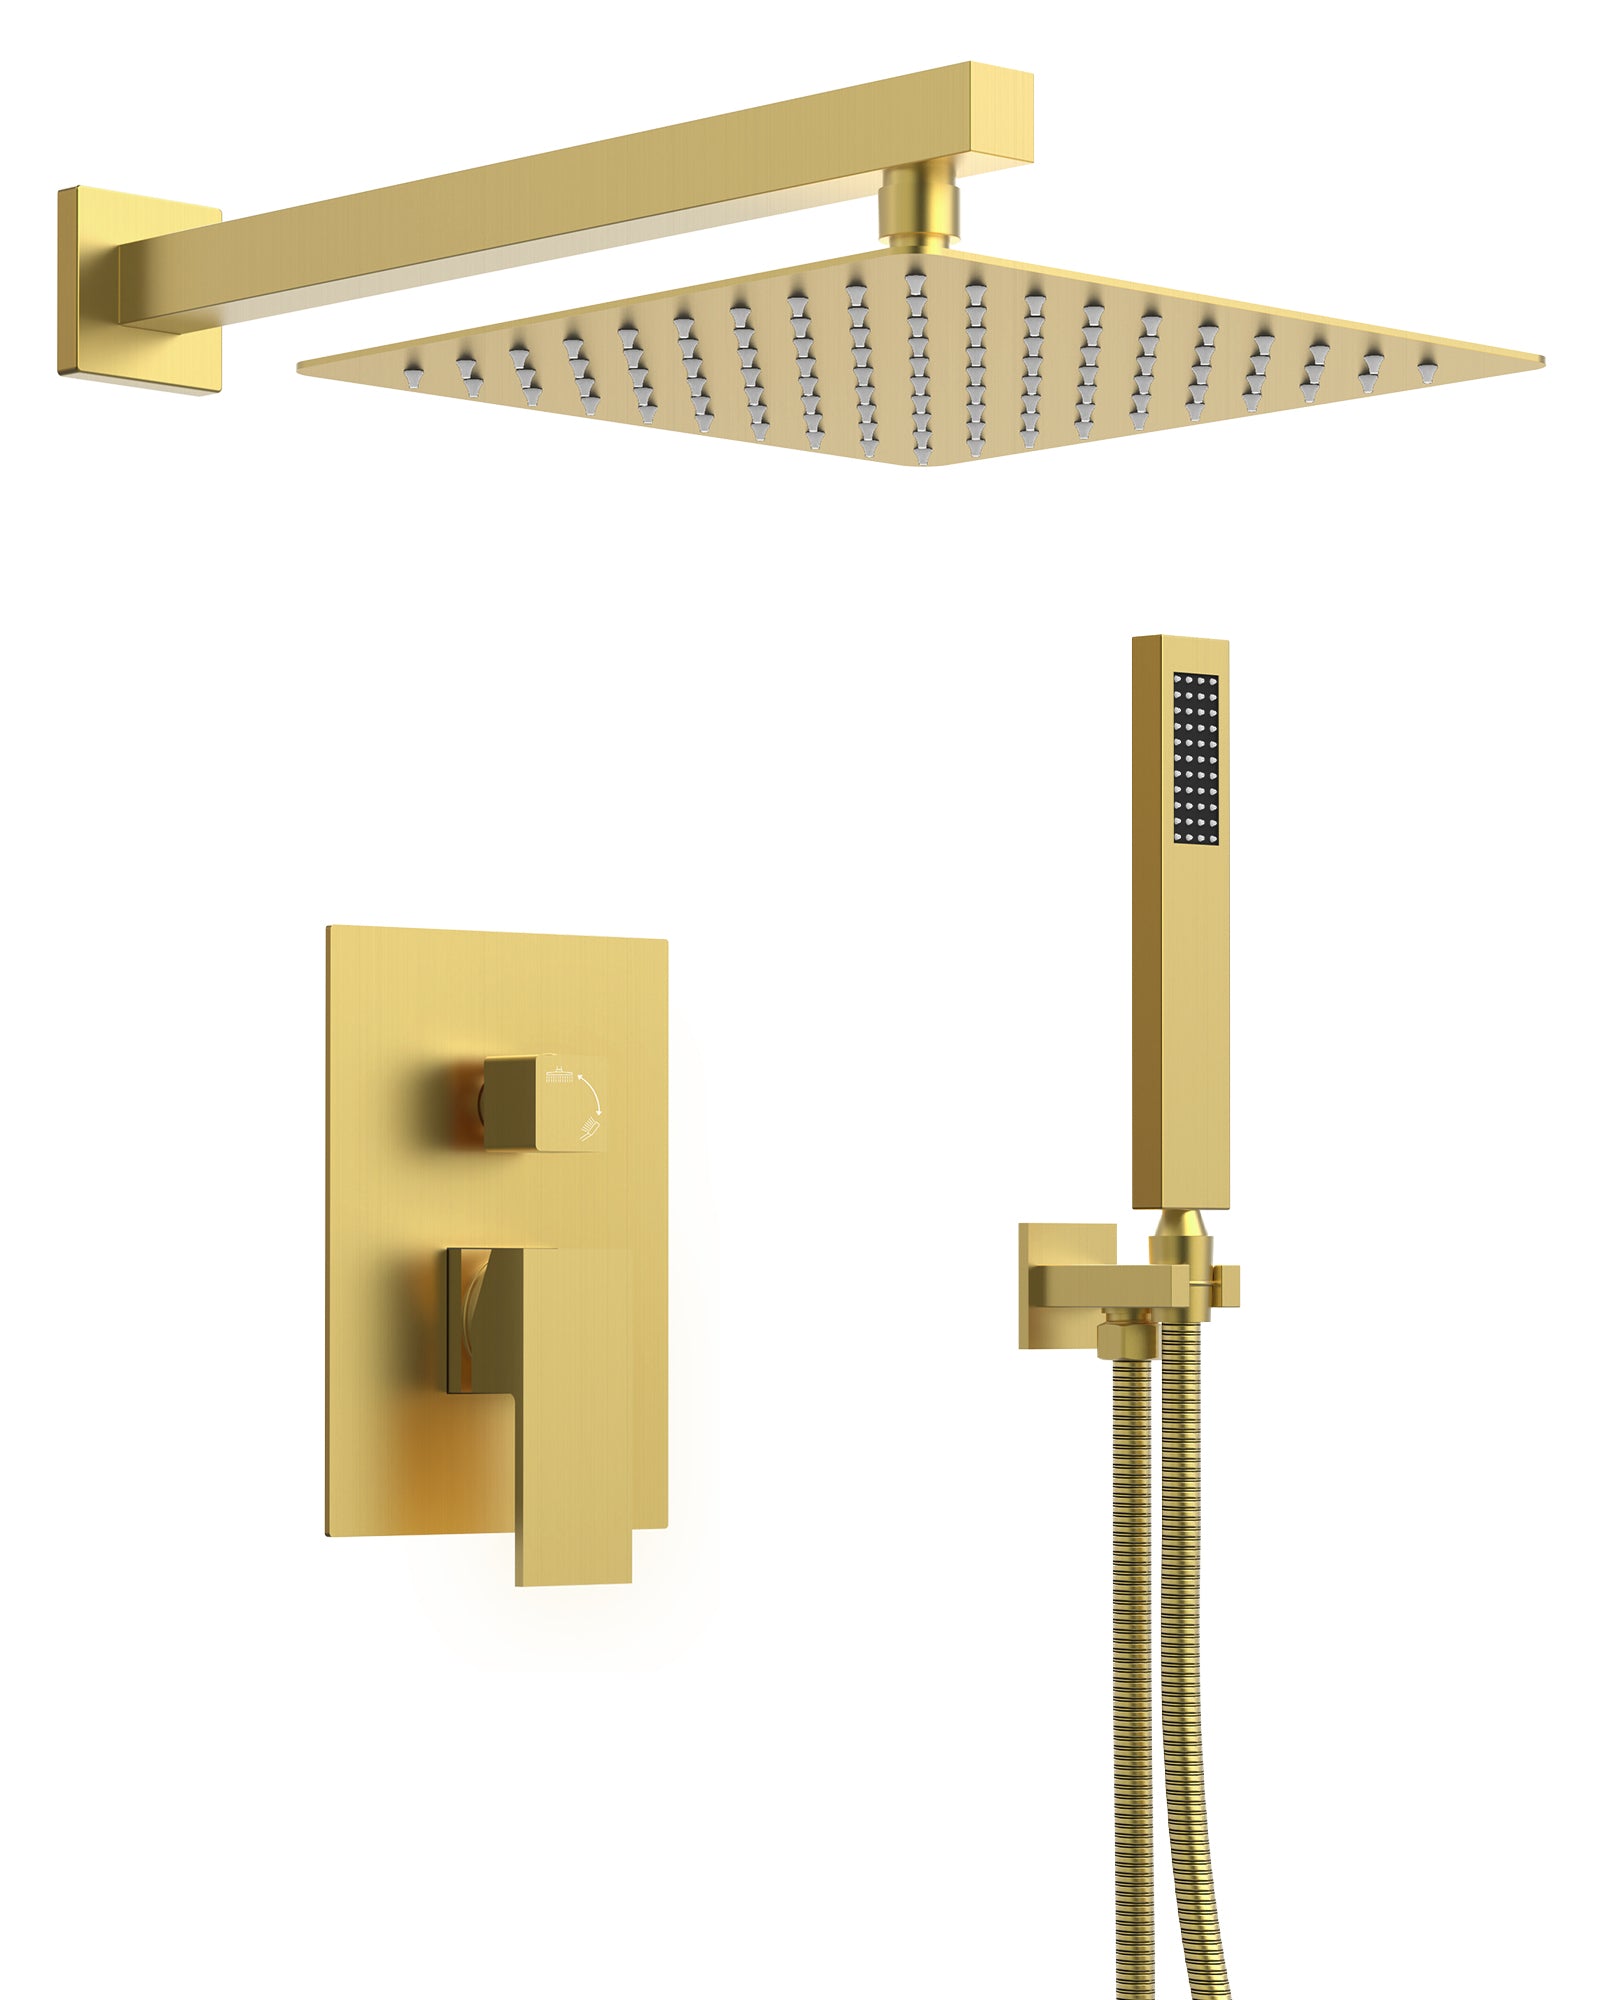 EVERSTEIN Luxury Gold Rainfall Shower System - 10" Ceiling Mount Head with 59" Handheld Spray Combo for Elegant Bathroom